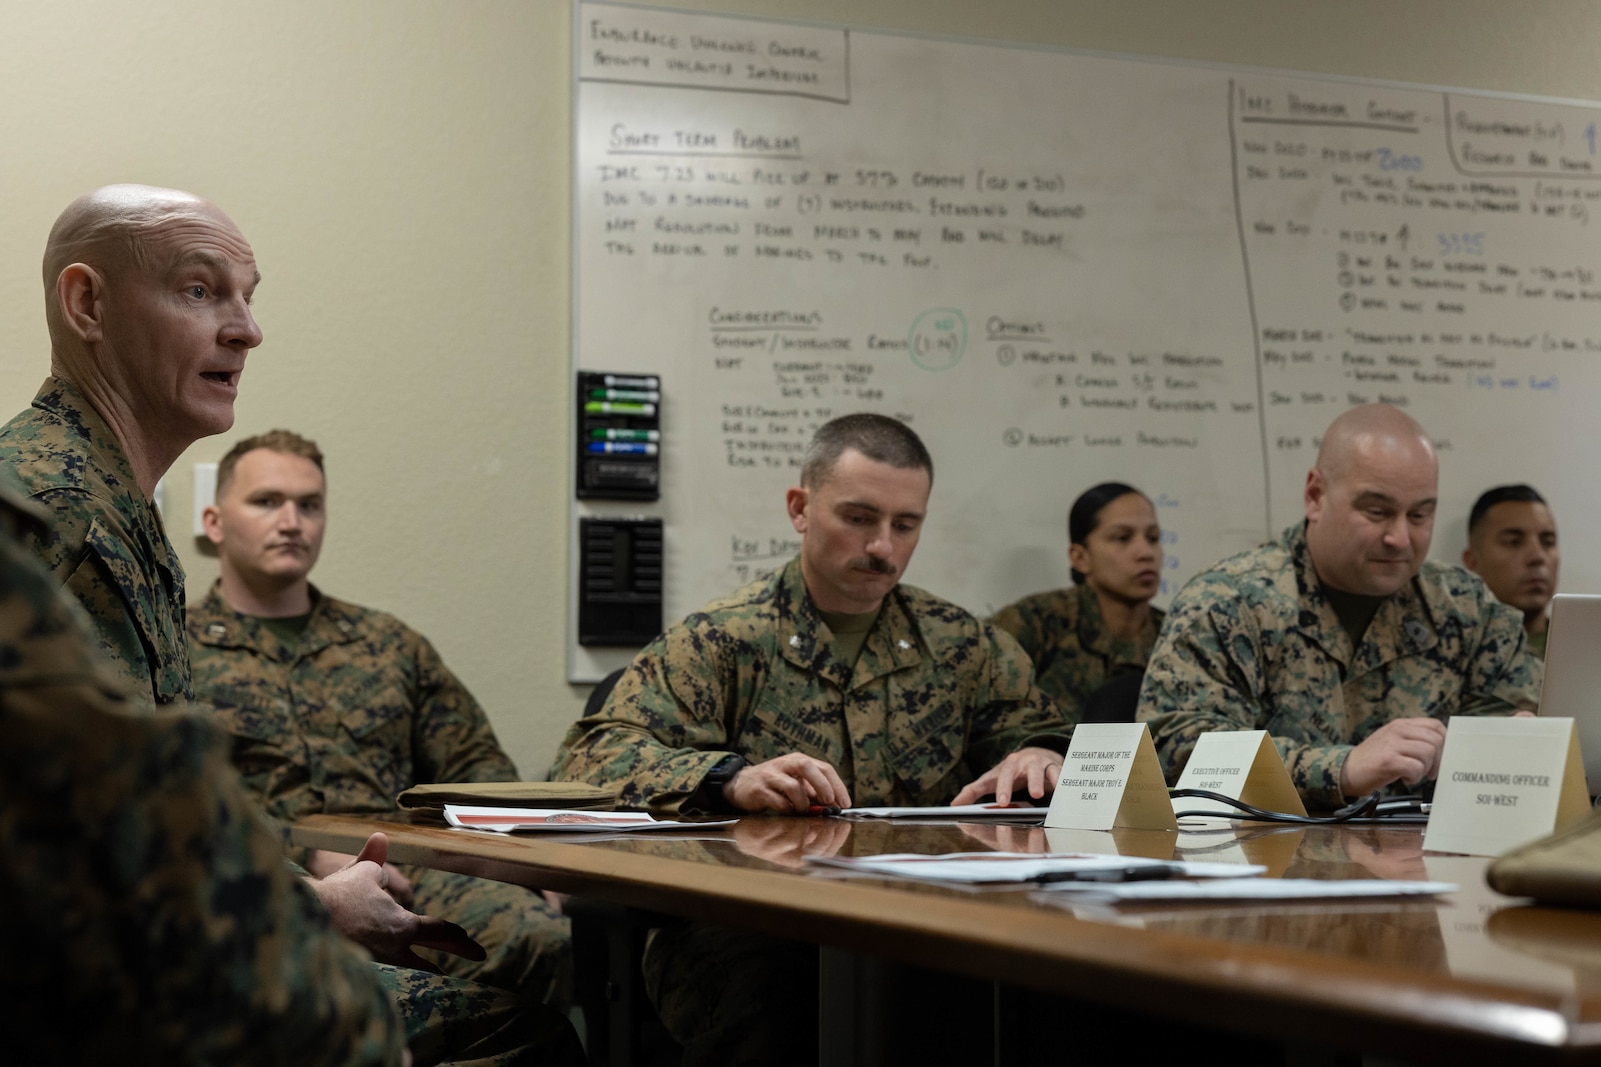 U.S. Marine Corps Sgt. Maj. Troy E. Black, the 19th Sergeant Major of the Marine Corps, speaks to leadership from the School of Infantry - West during his visit to Marine Corps Base Camp Pendleton, California, Feb. 7, 2023. The Sergeant Major of the Marine Corps visited units across I Marine Expeditionary Force, speaking to Marines about talent management, force design, quality of life and the importance of maturing the force in the infantry. (U.S. Marine Corps photo by Lance Cpl. Fred Garcia)